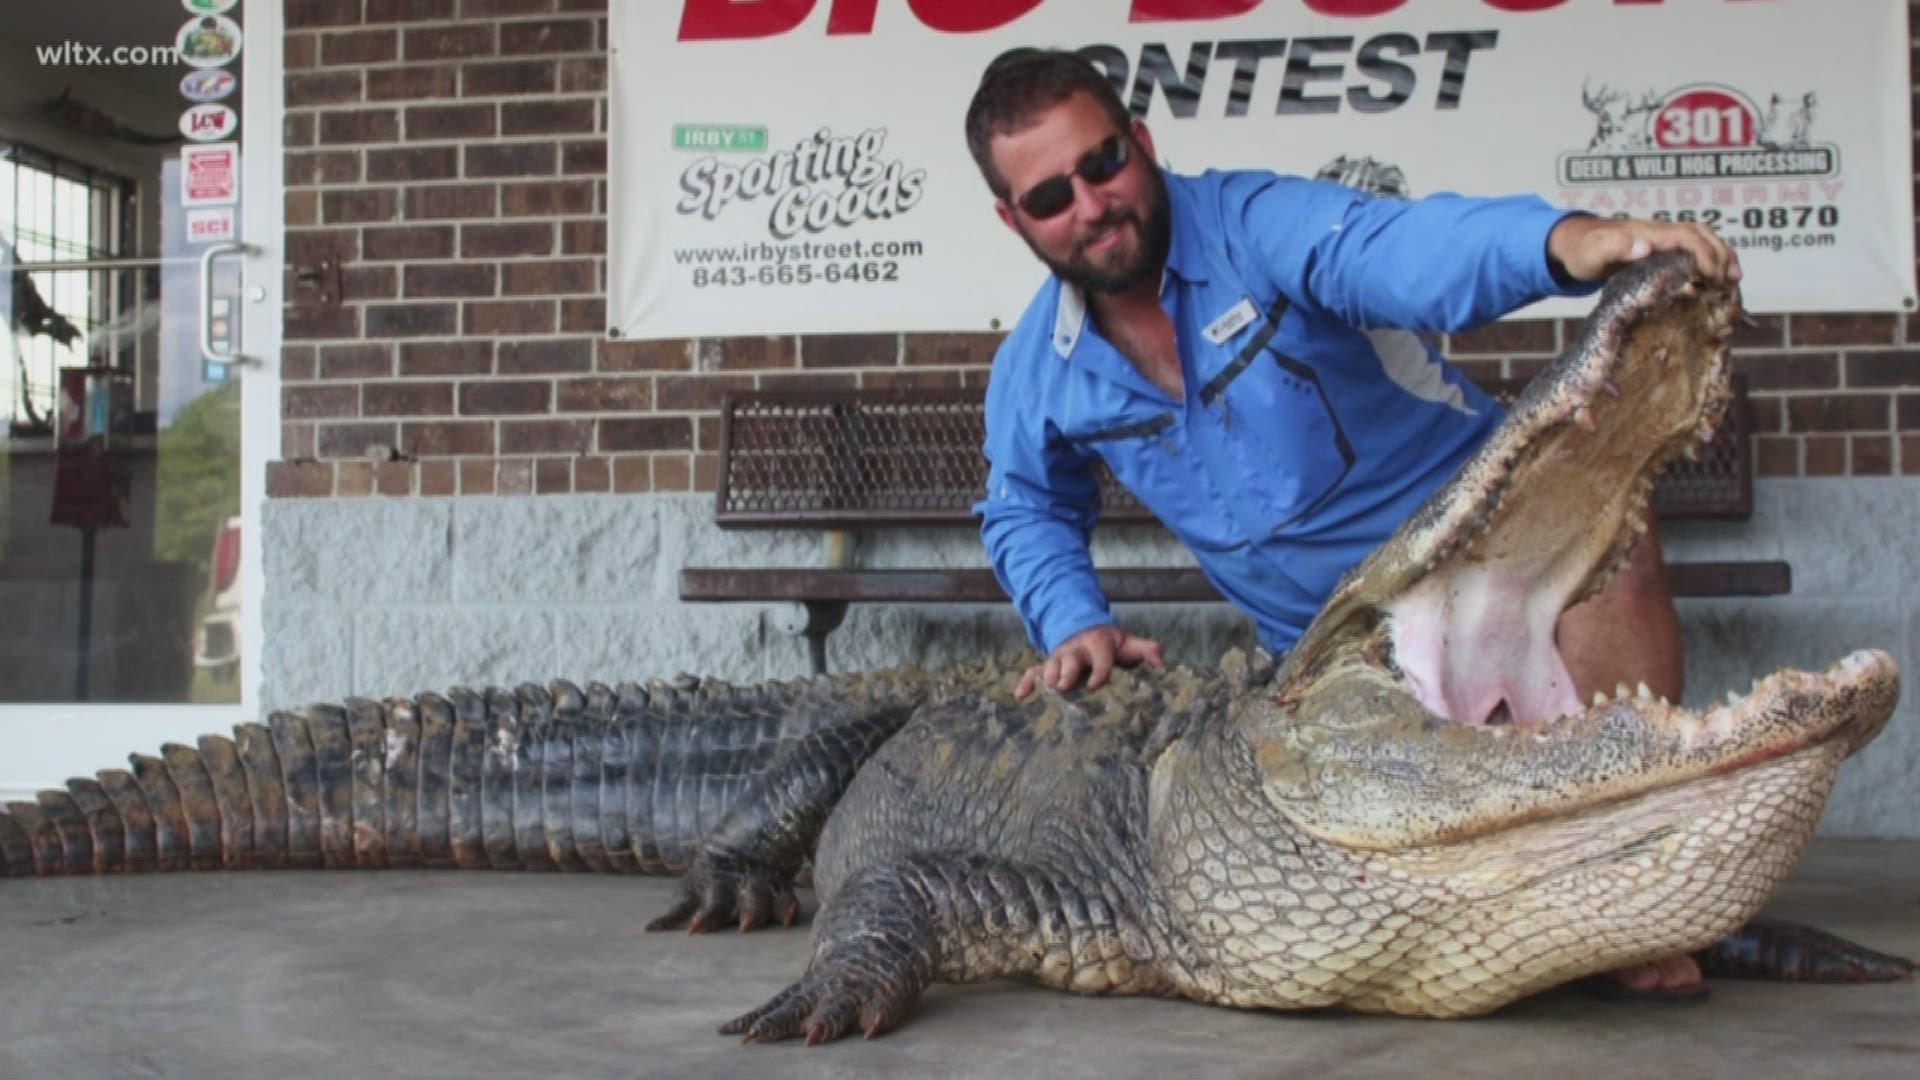 The gator weighted a monstrous 726 pounds.